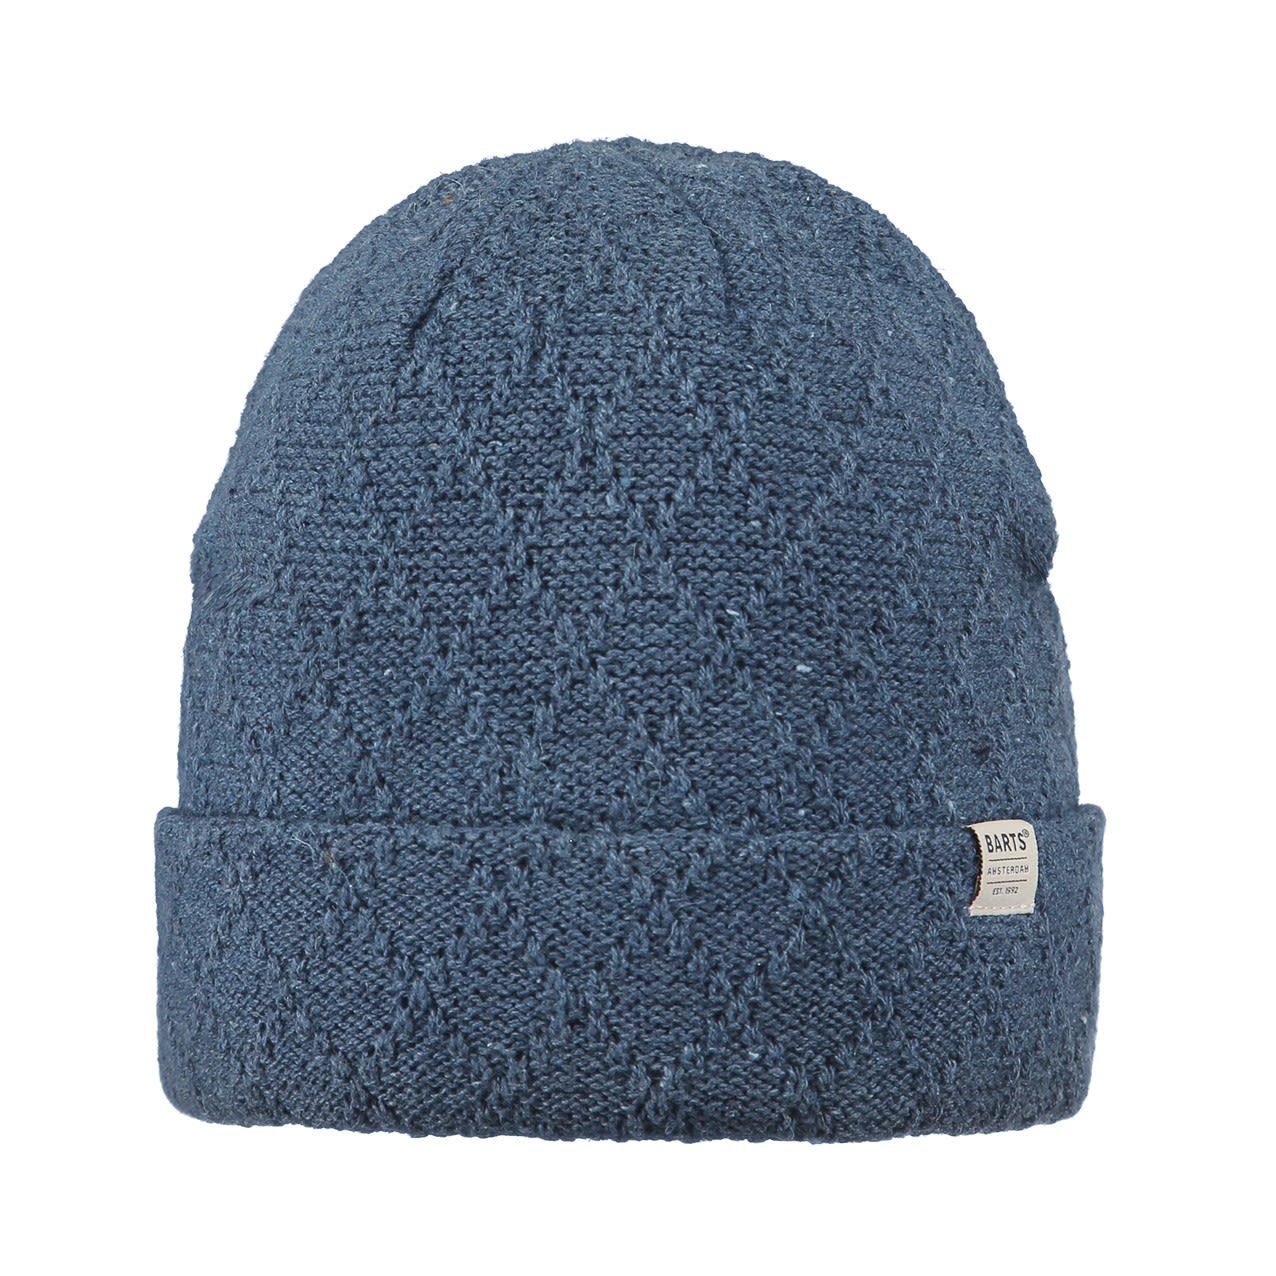 Beanie W Beanie Barts Barts Bruges Accessoires